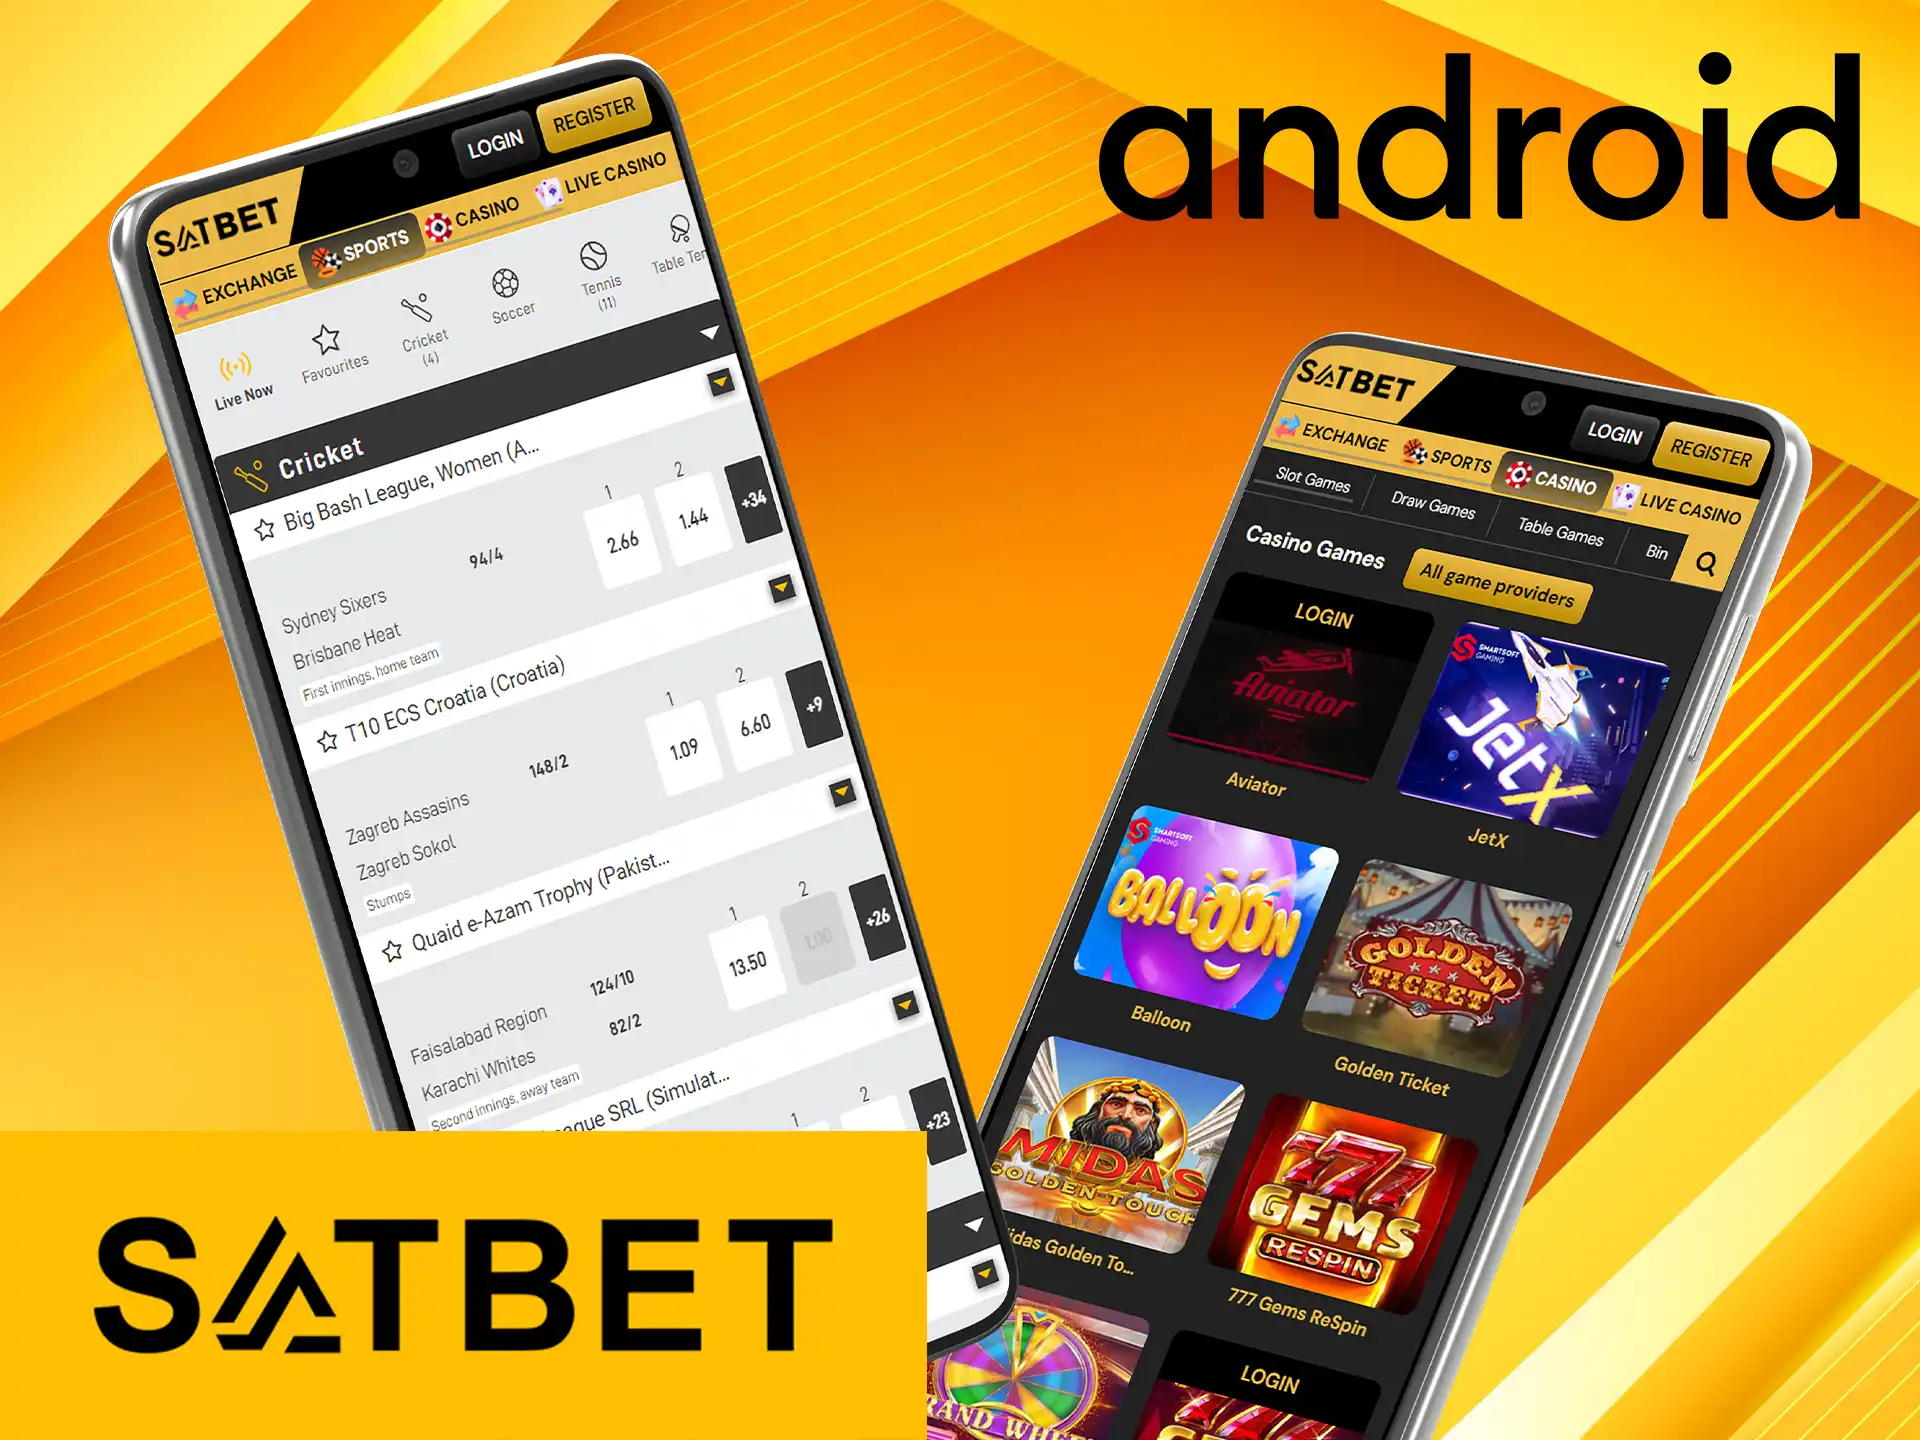 The Satbet app is available for Android users, you can download it for free and start betting.